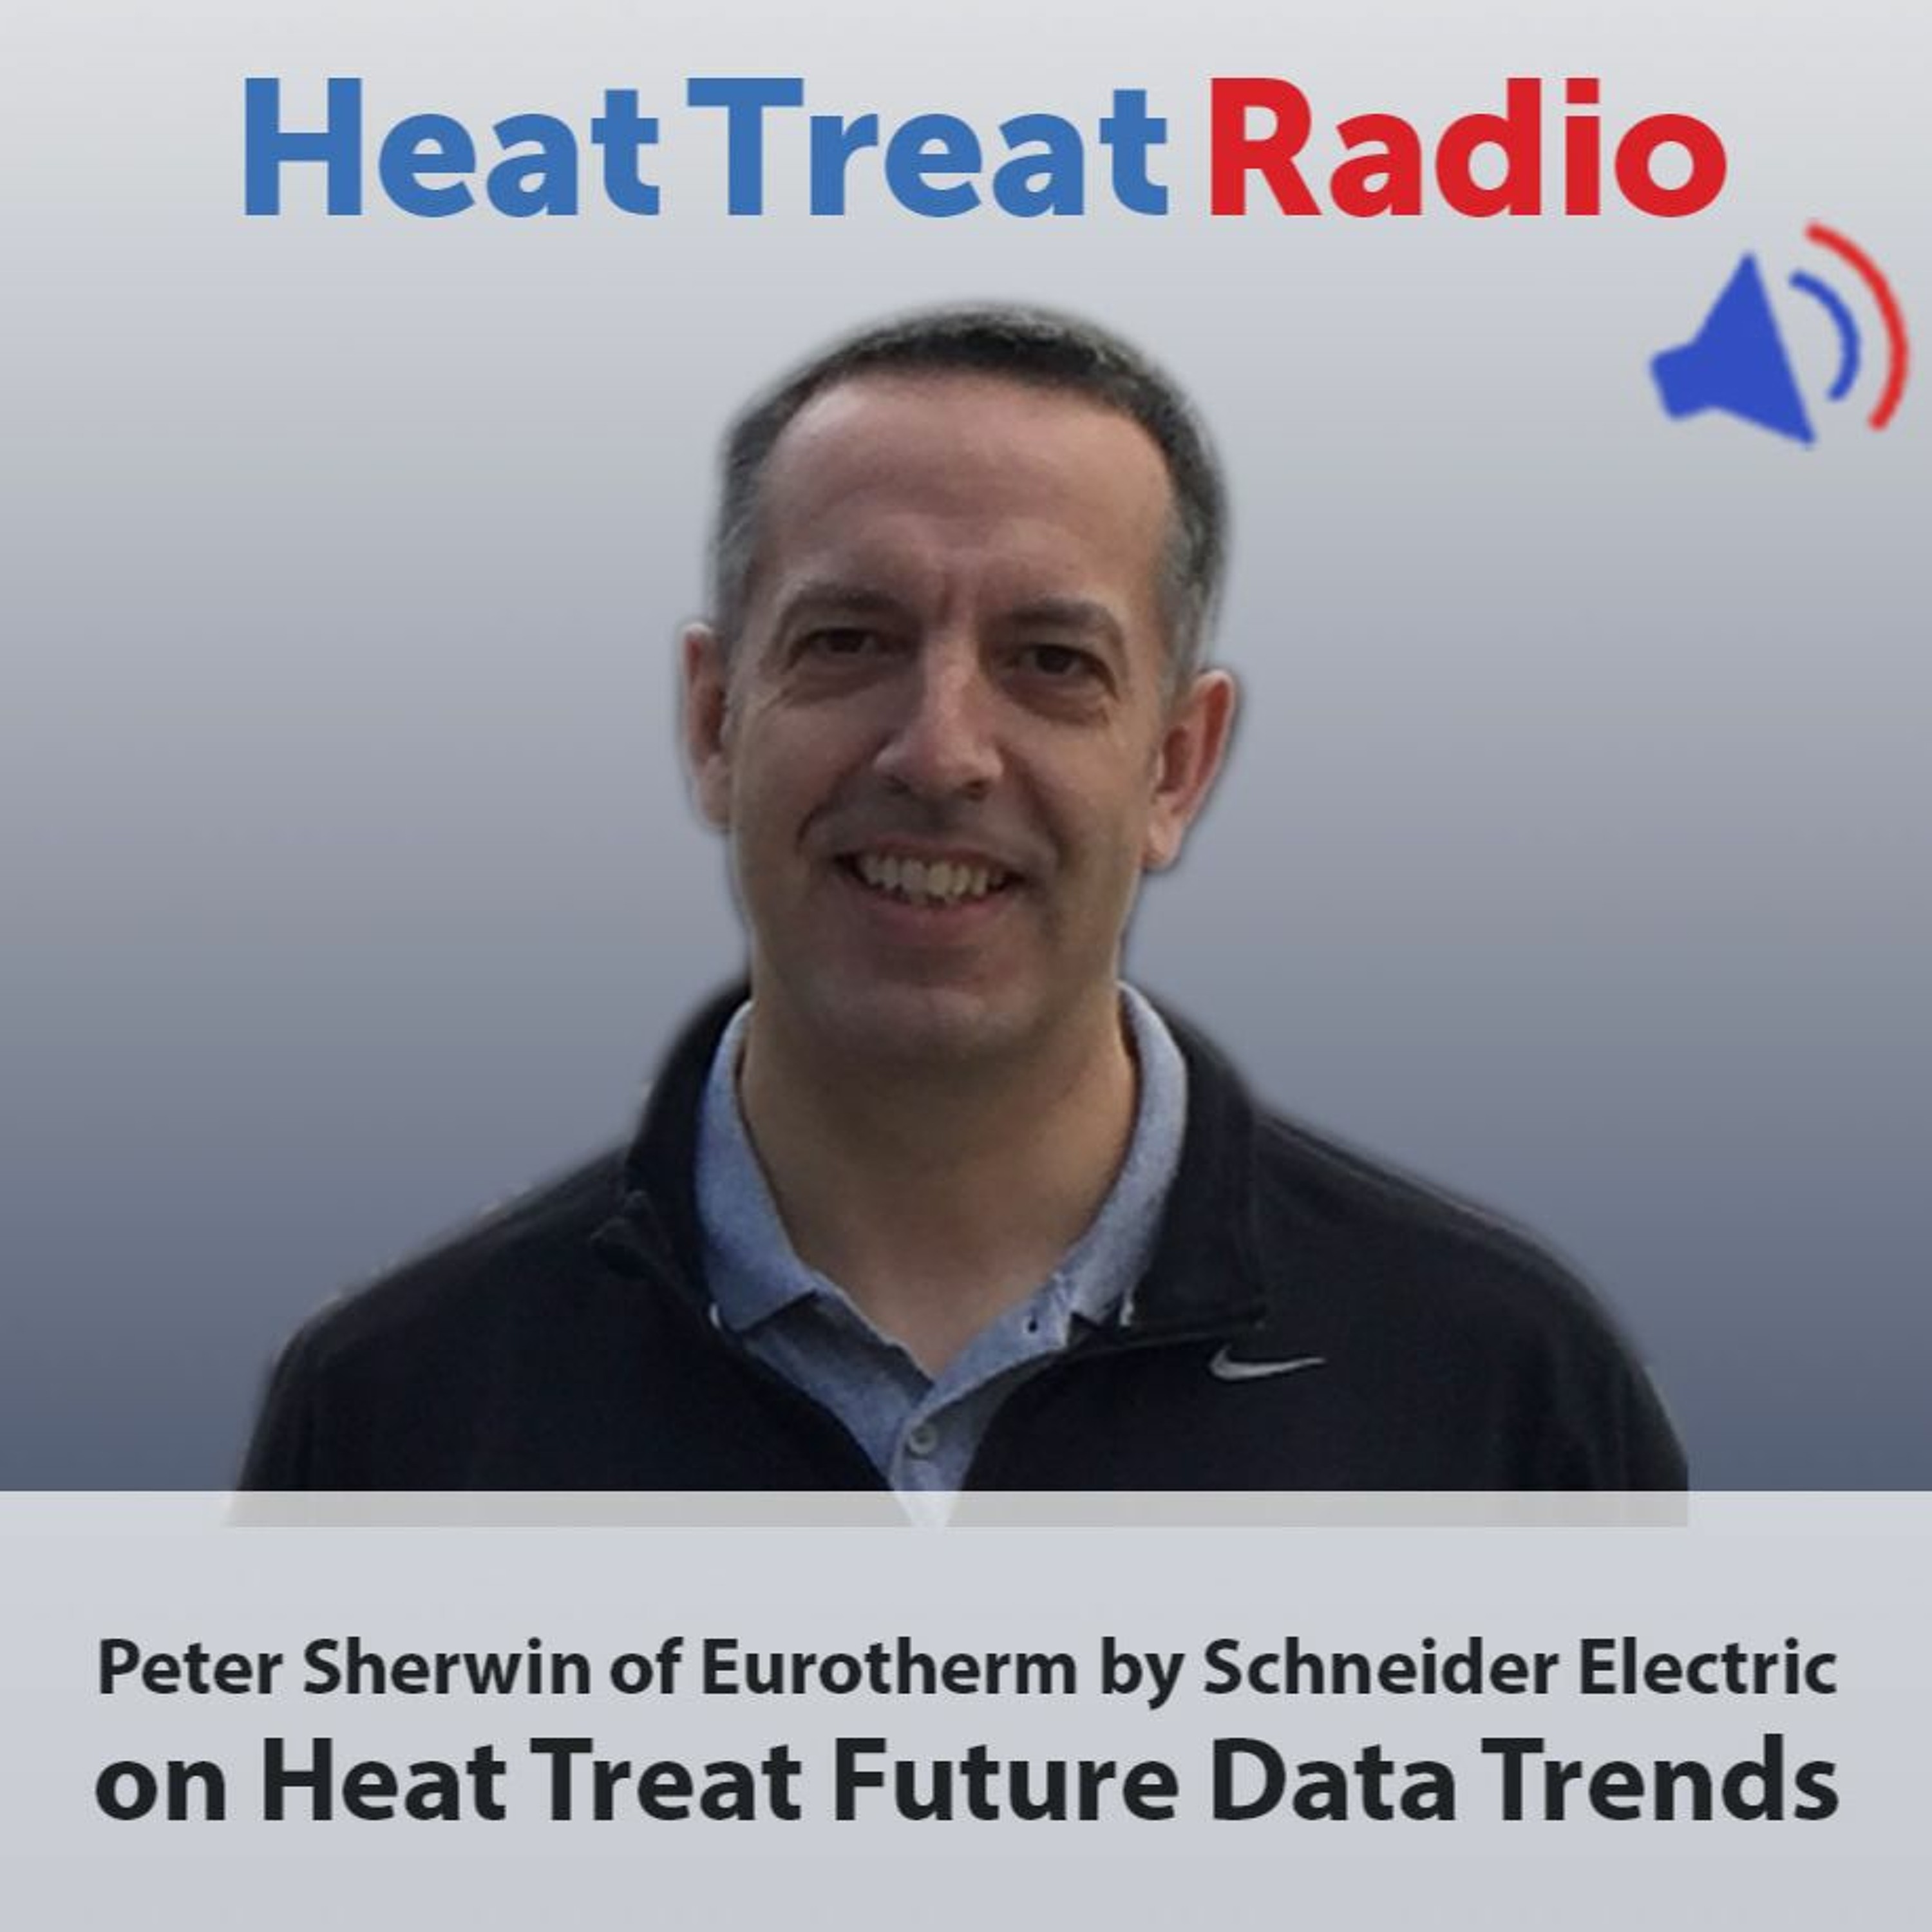 Heat Treat Radio #26: Cutting Edge Trends in Data with Peter Sherwin, Eurotherm